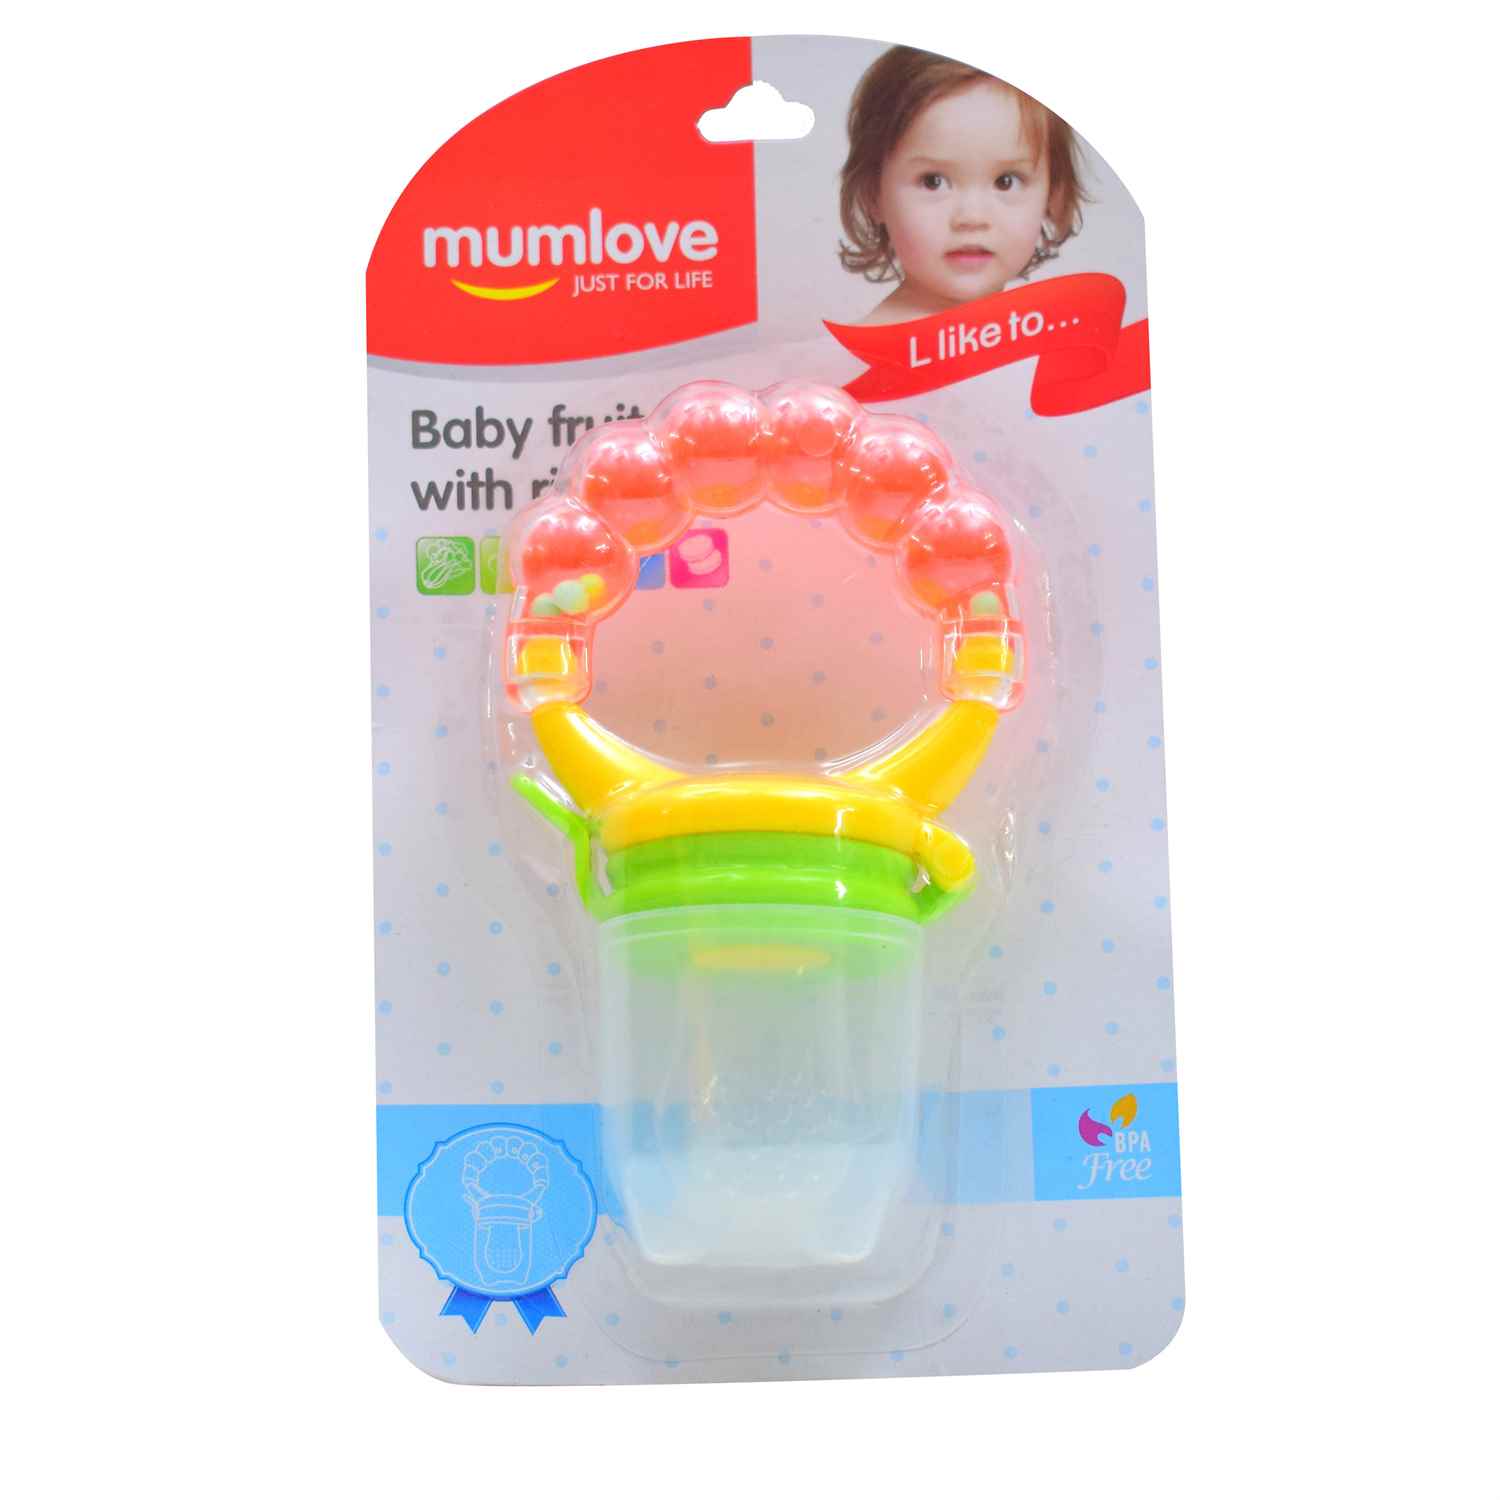 MUMLOVE Baby Fruit Feeder Doodle Ring 5+m Age, Yellow-Green